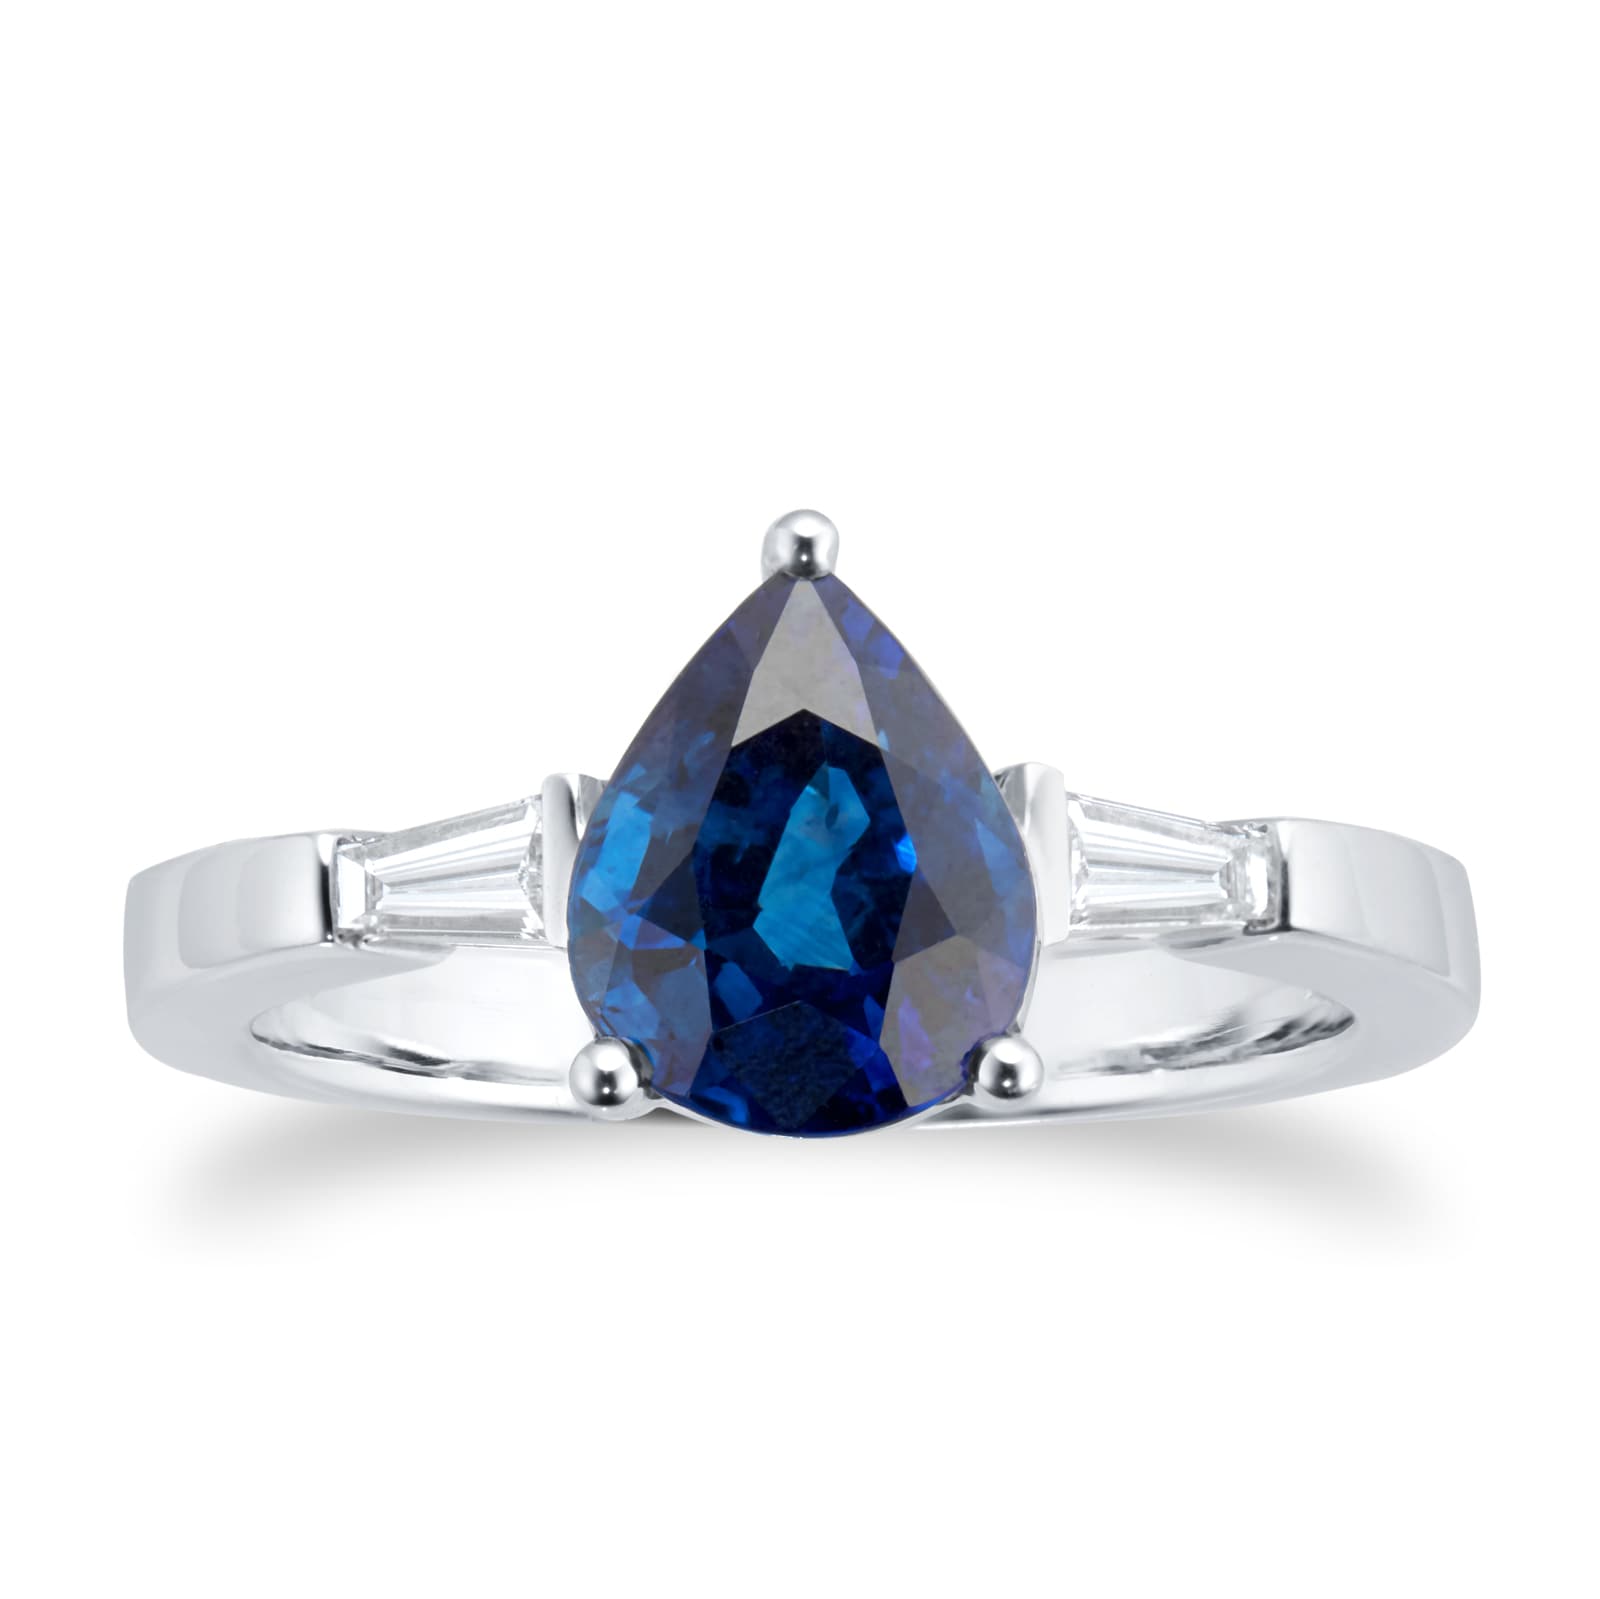 18ct White Gold Pear Cut 2.37ct Sapphire & 0.21ct Diamond Ring - Ring Size N